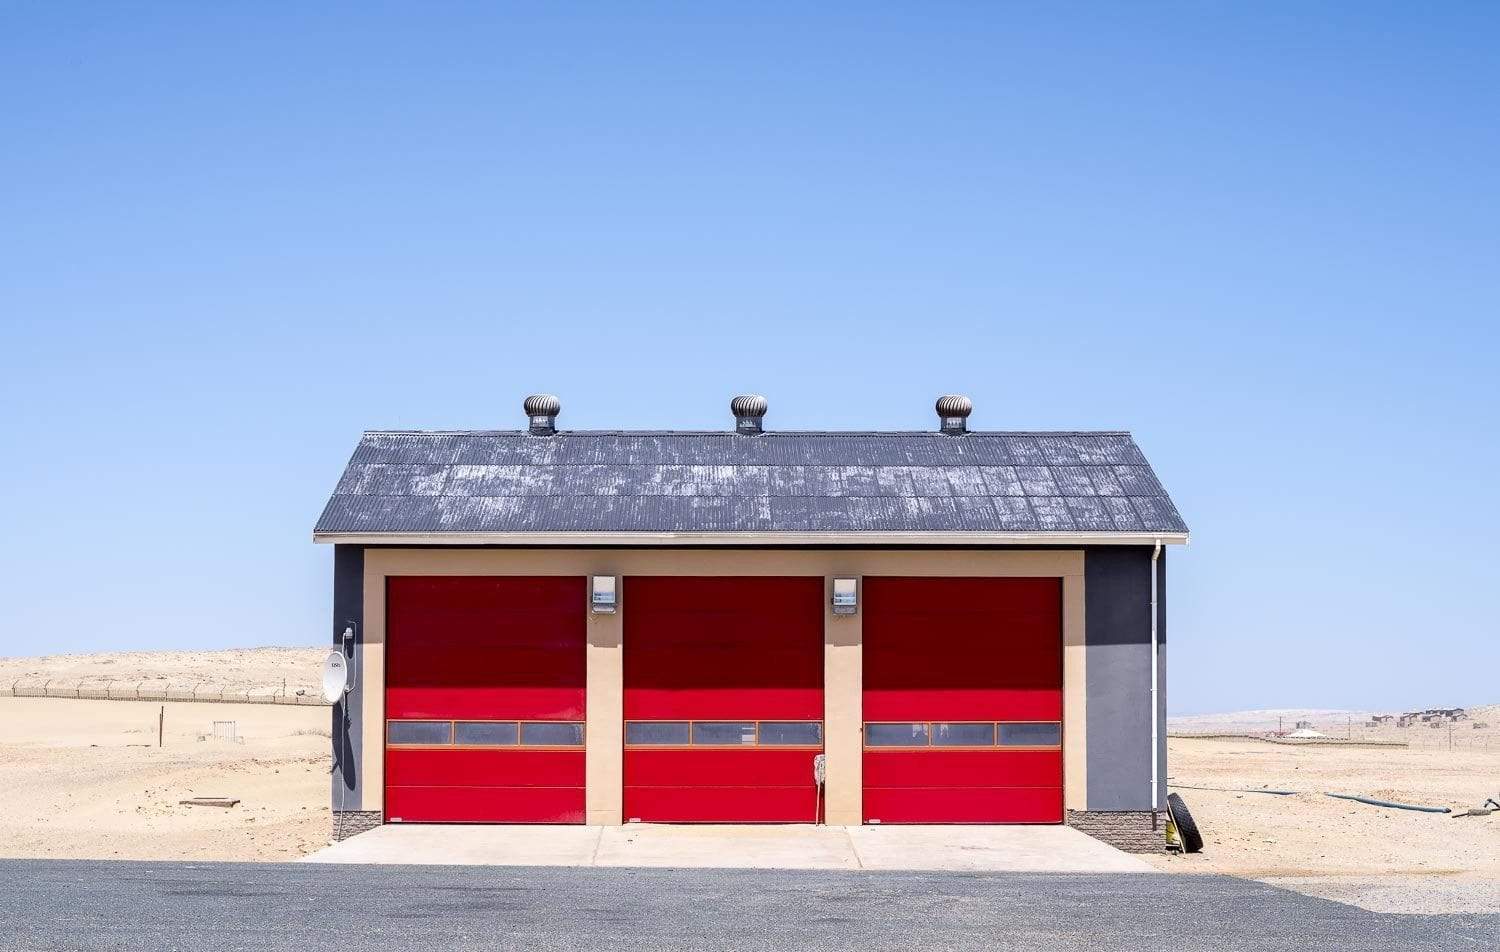 A small house with red walls and a black roof, in a desert area, Namibia #3